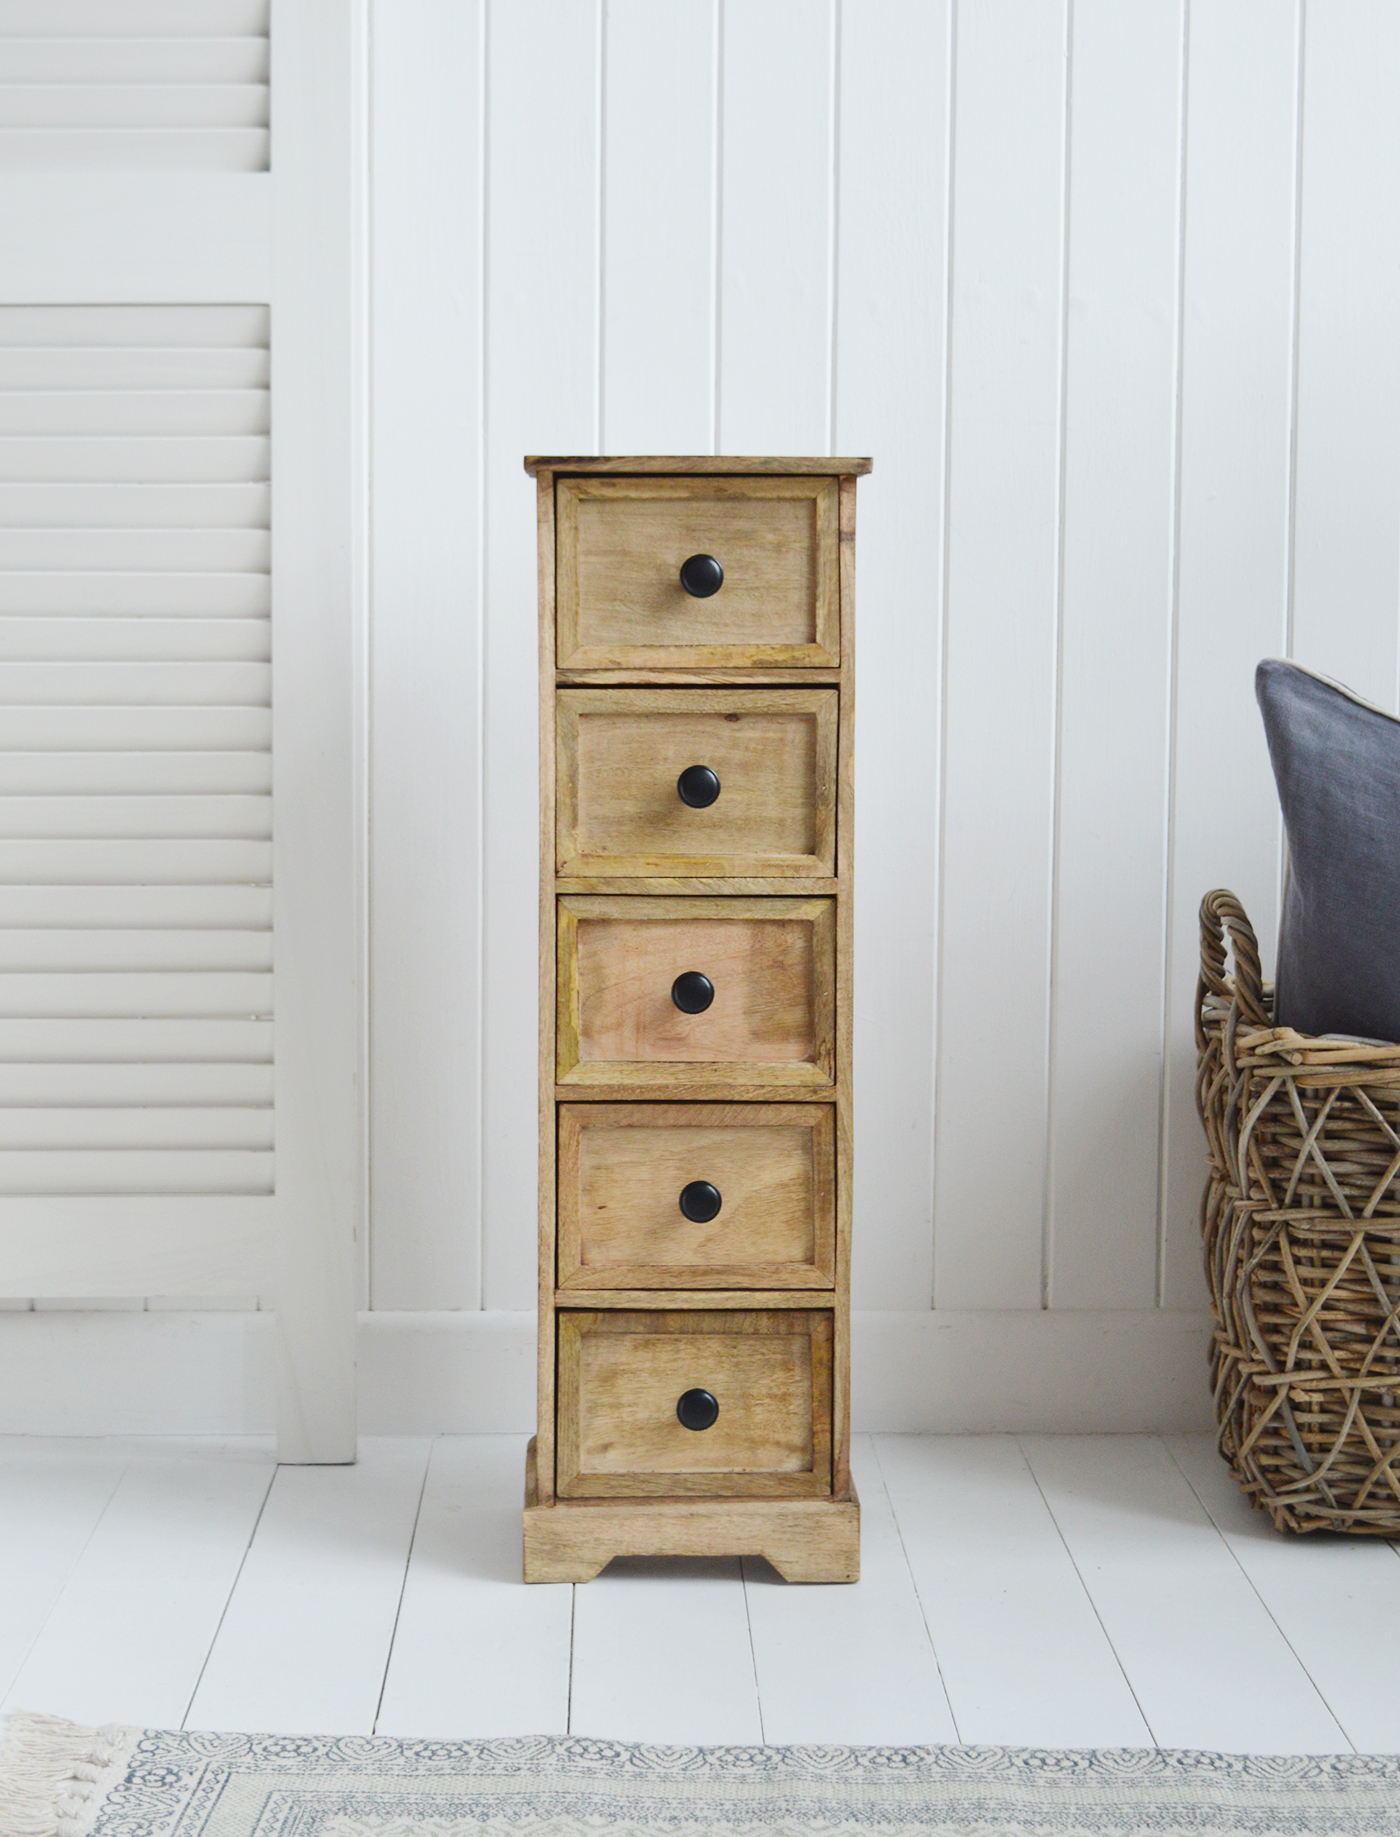 The Dorset narrow 5 drawer bedside cabinet. Ideal to fit in small spaces bedside the bed in slim bedrooms